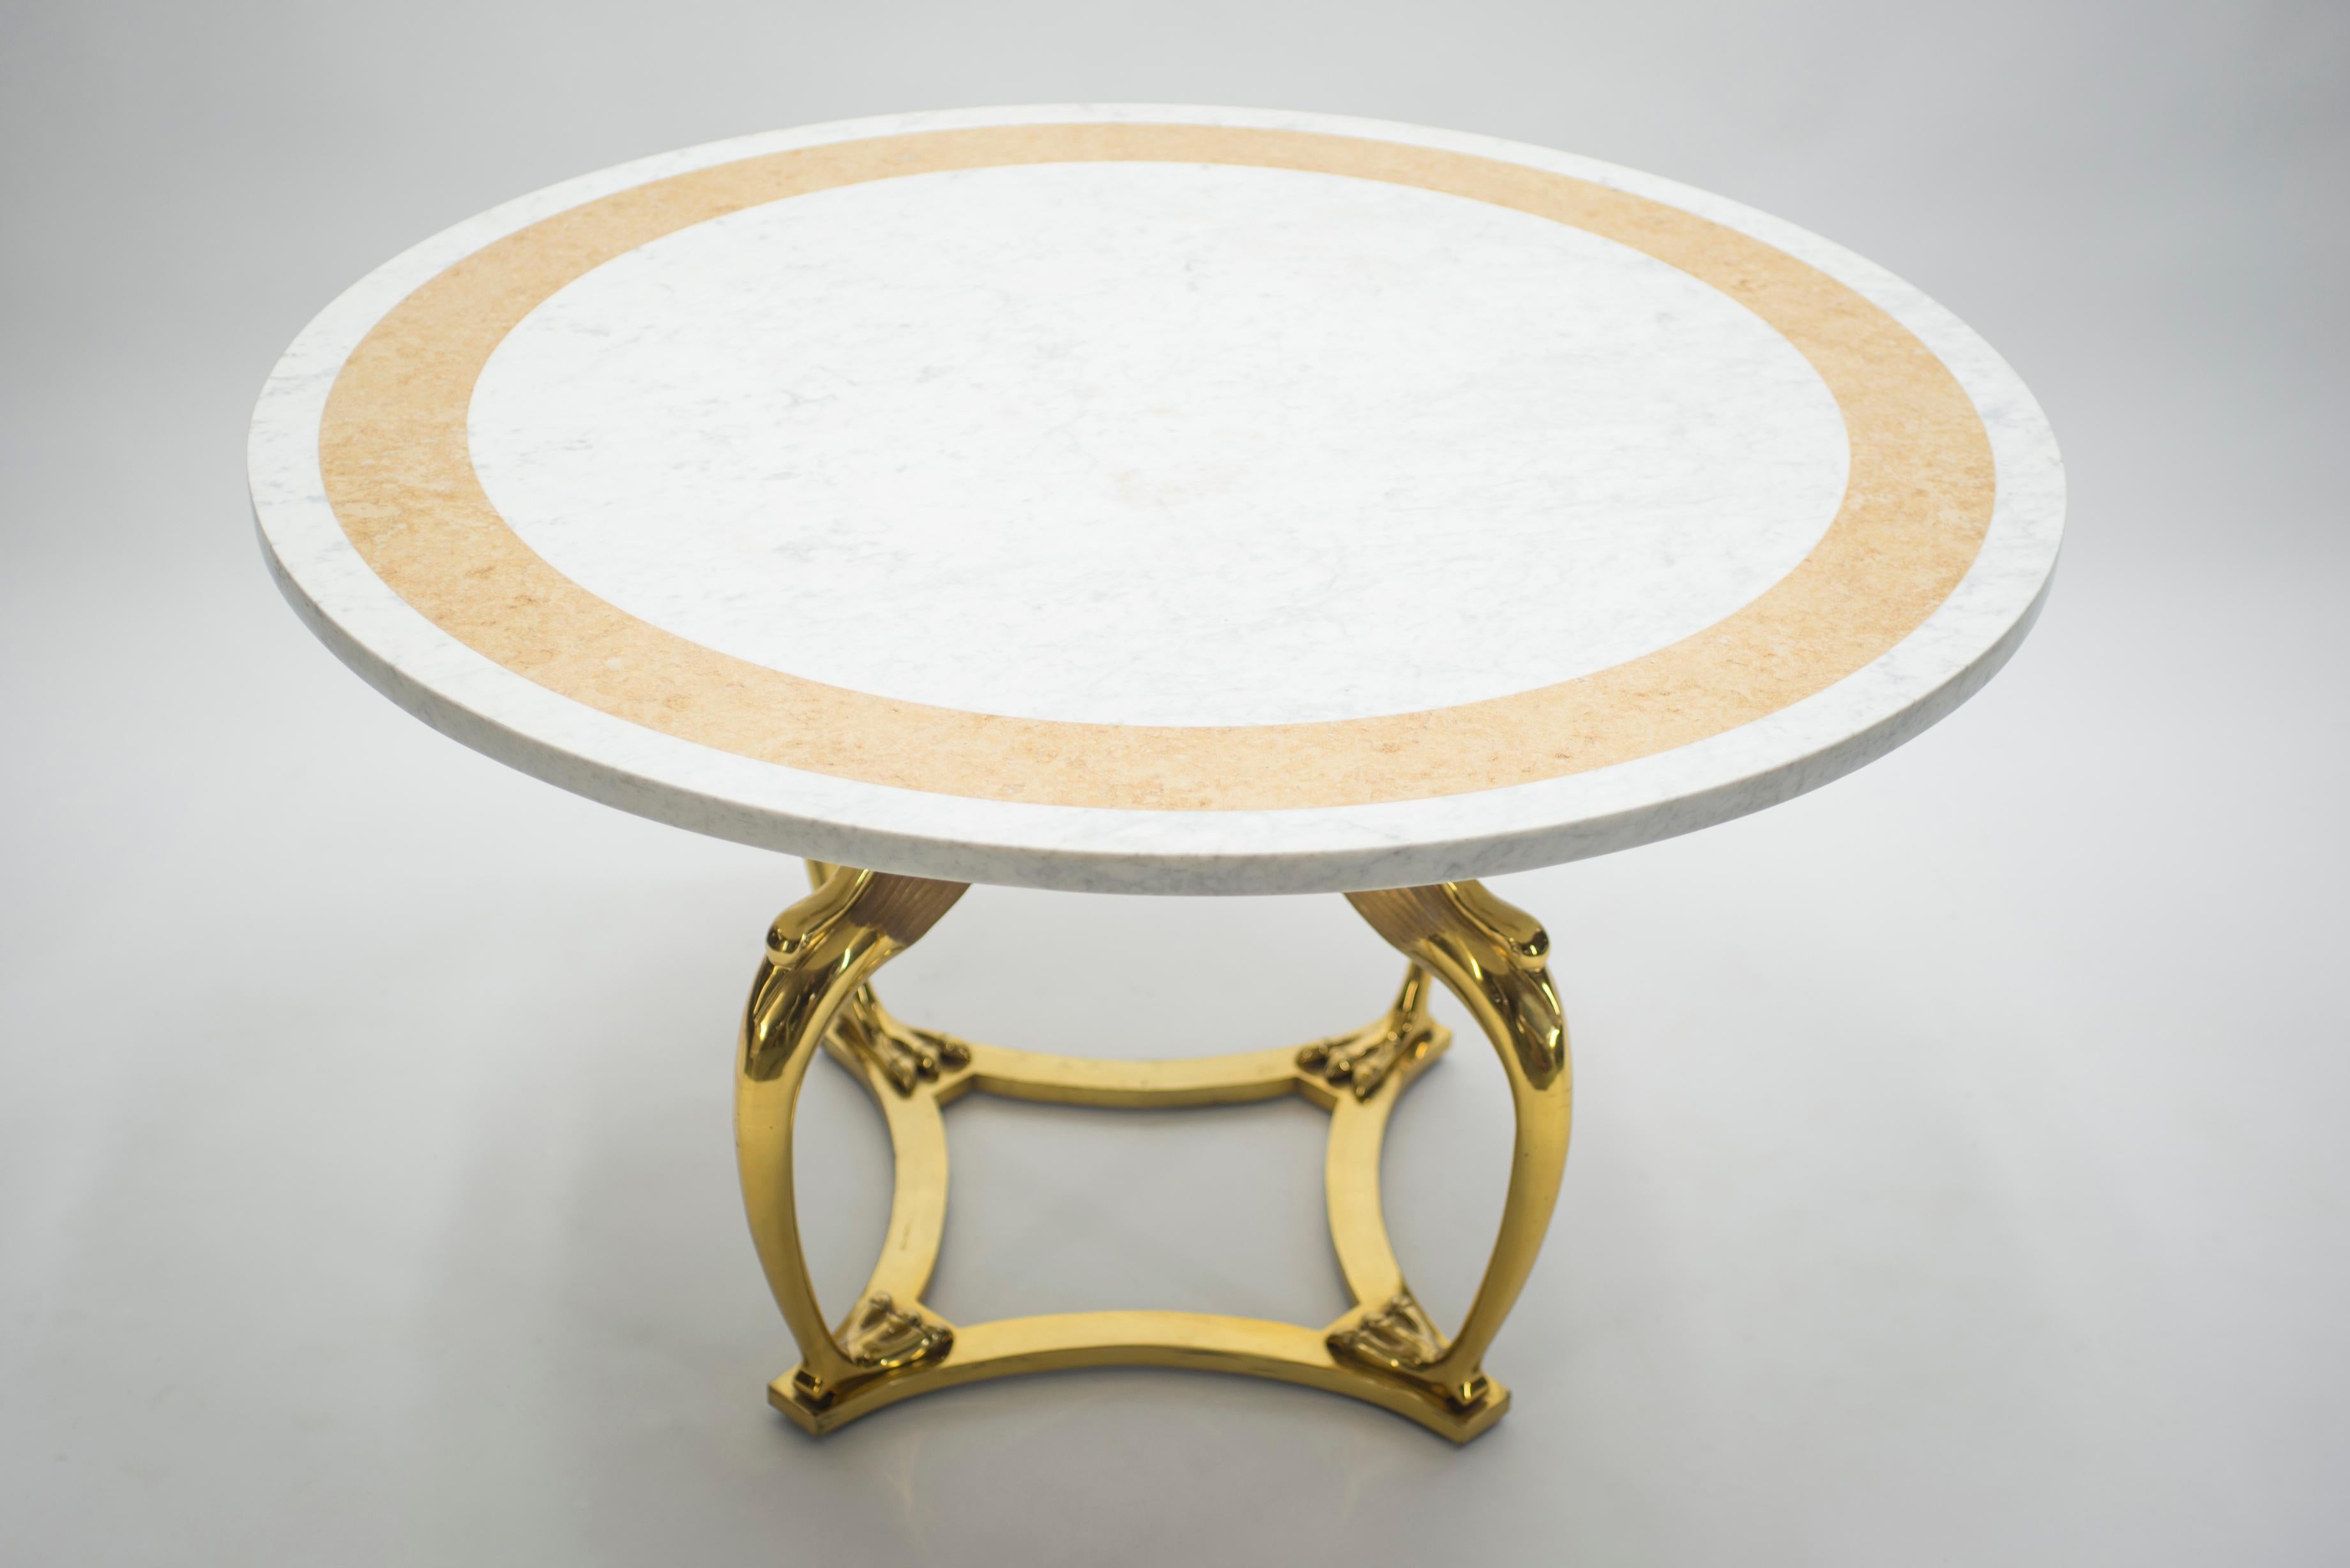 French Rare Mid-Century Modern Robert Thibier Brass Marble Dining Table, 1970s